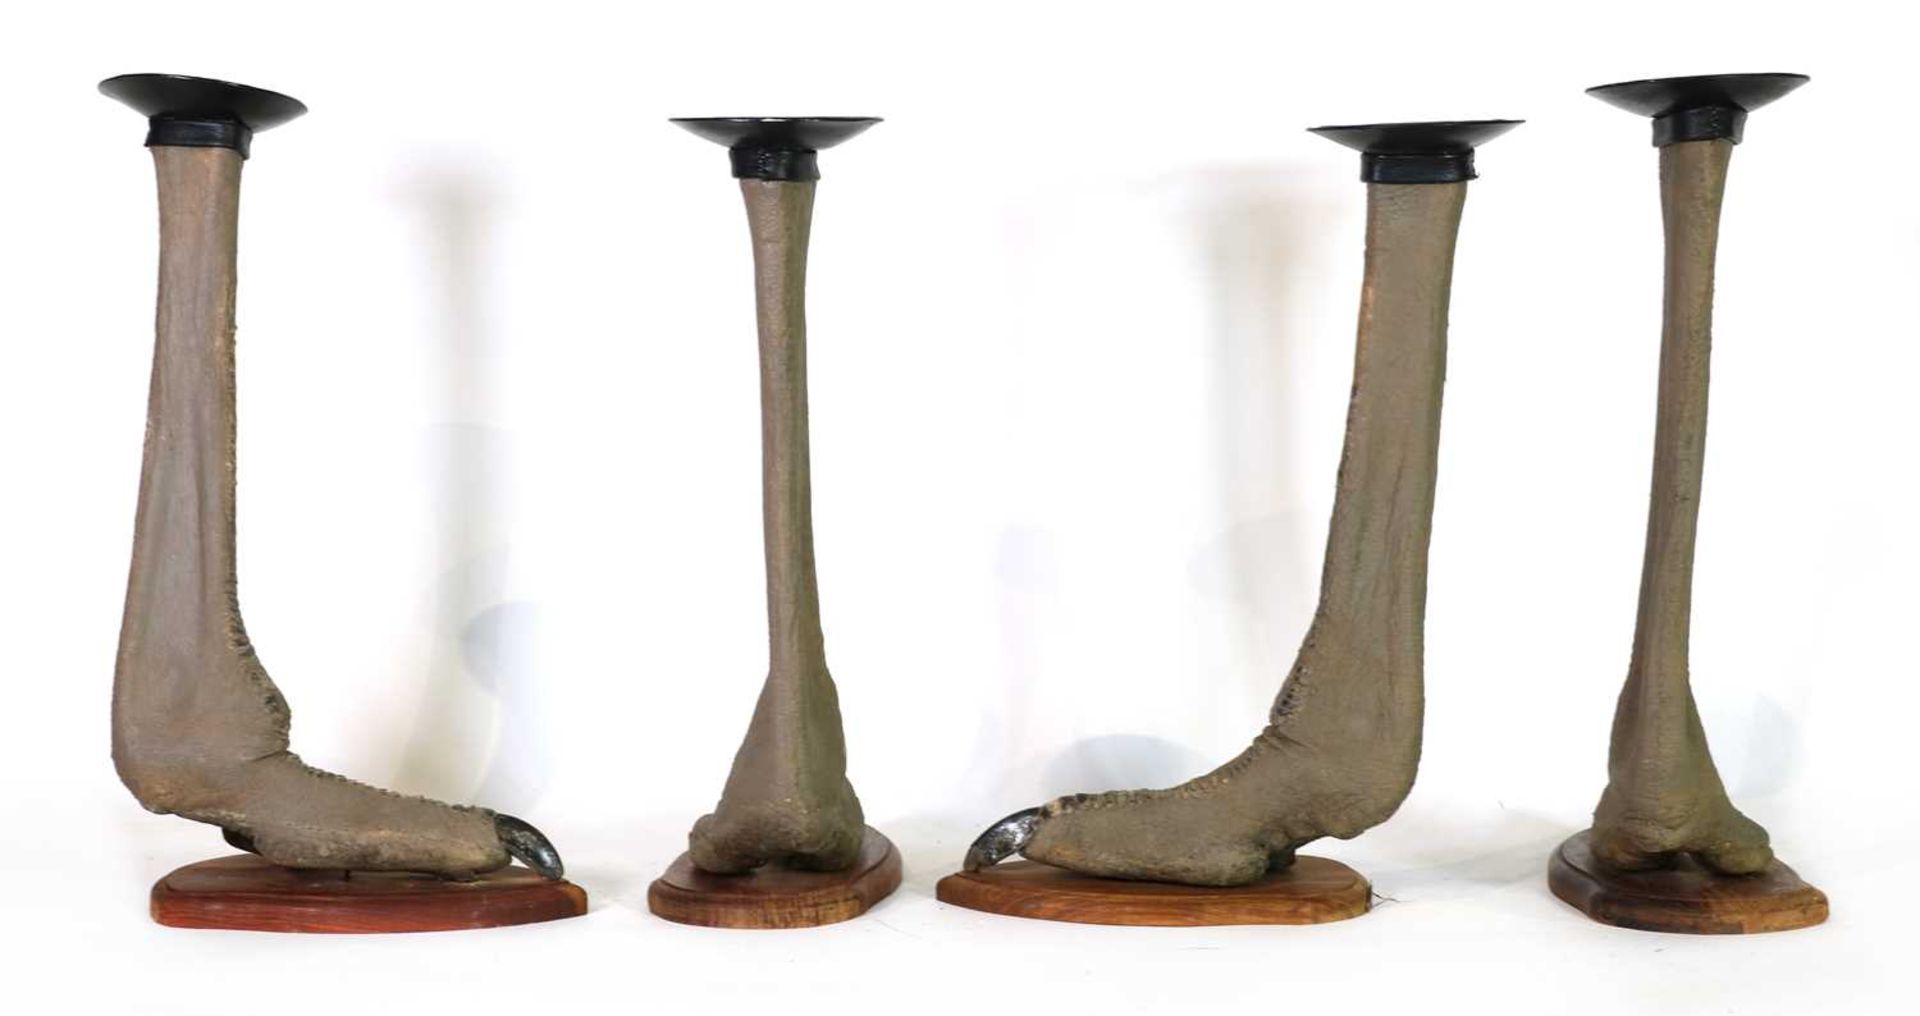 Taxidermy: Four ostrich foot candle holders